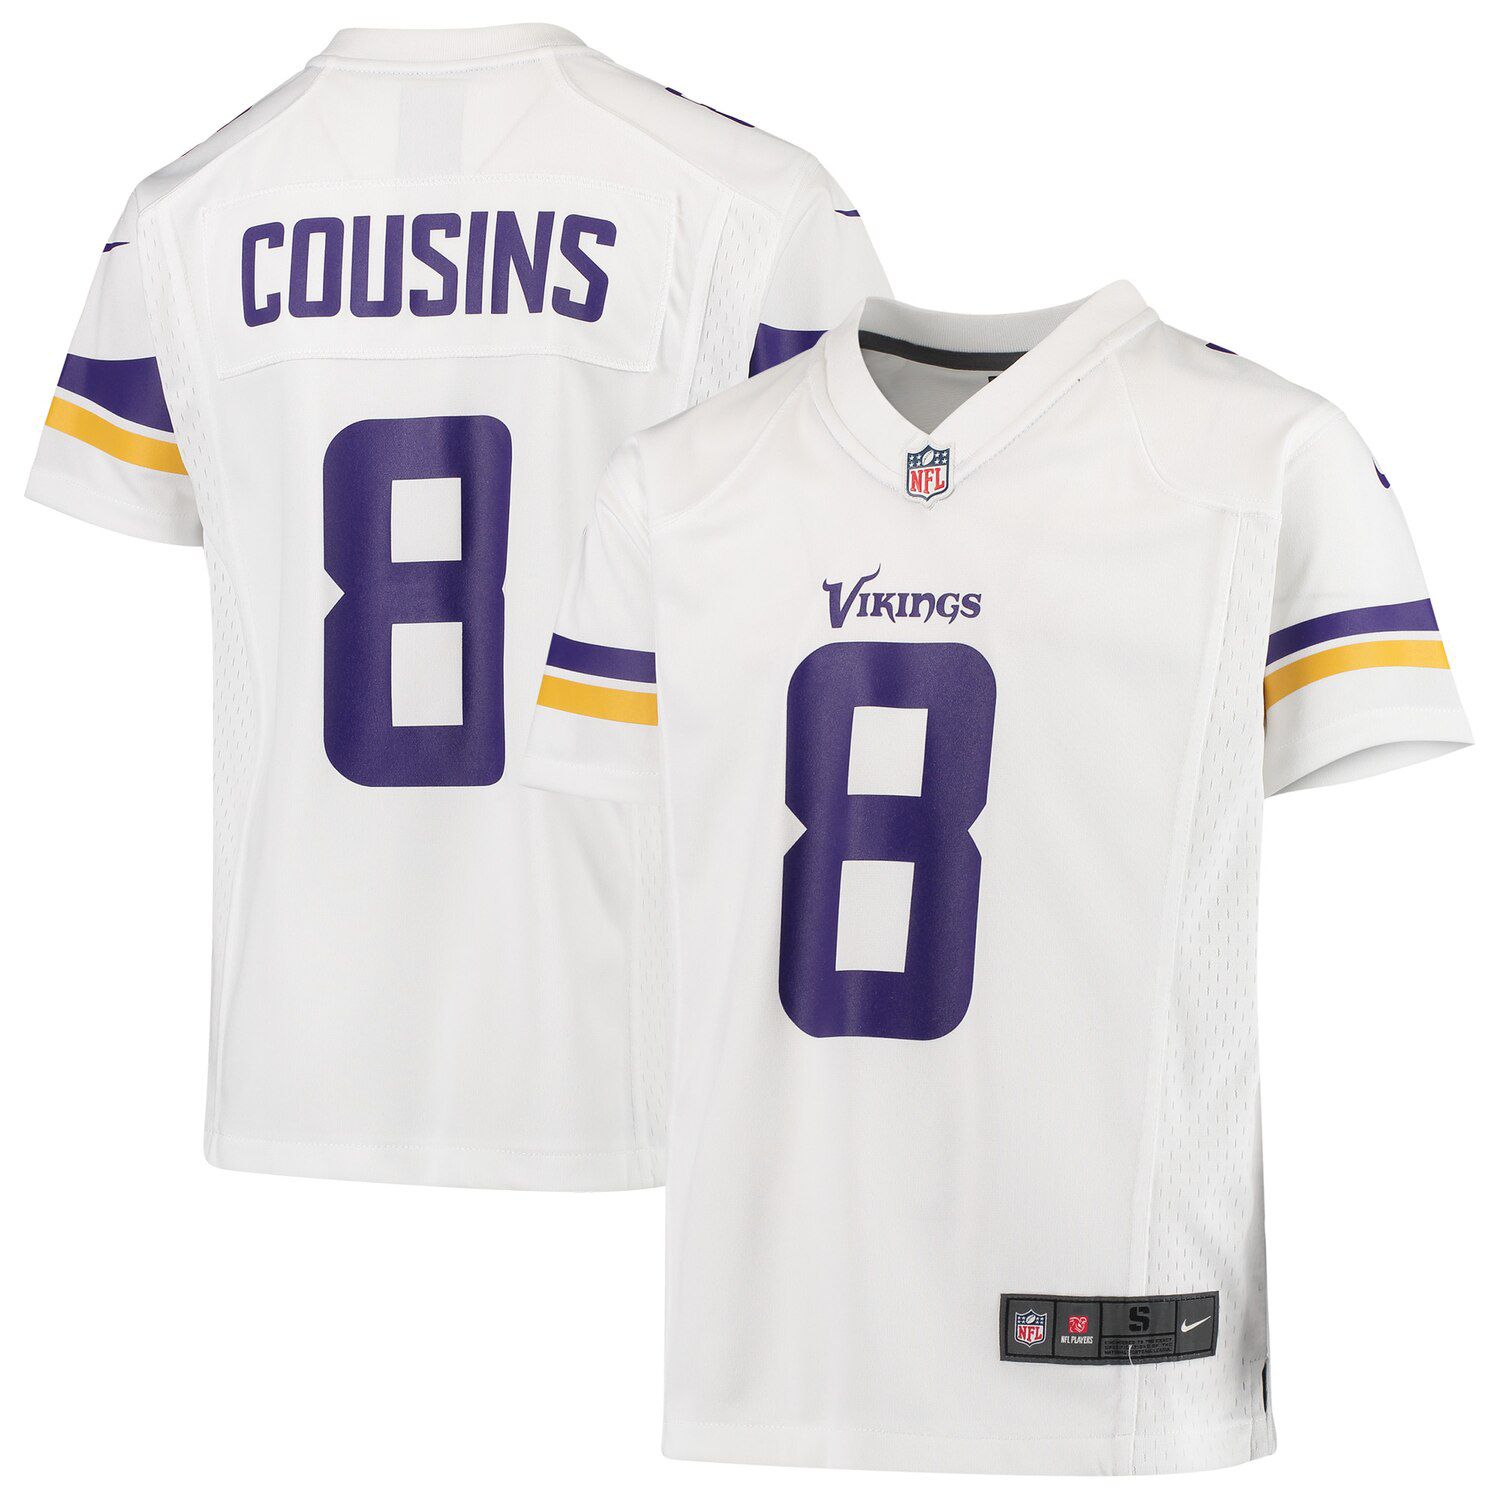 kirk cousins jersey for sale